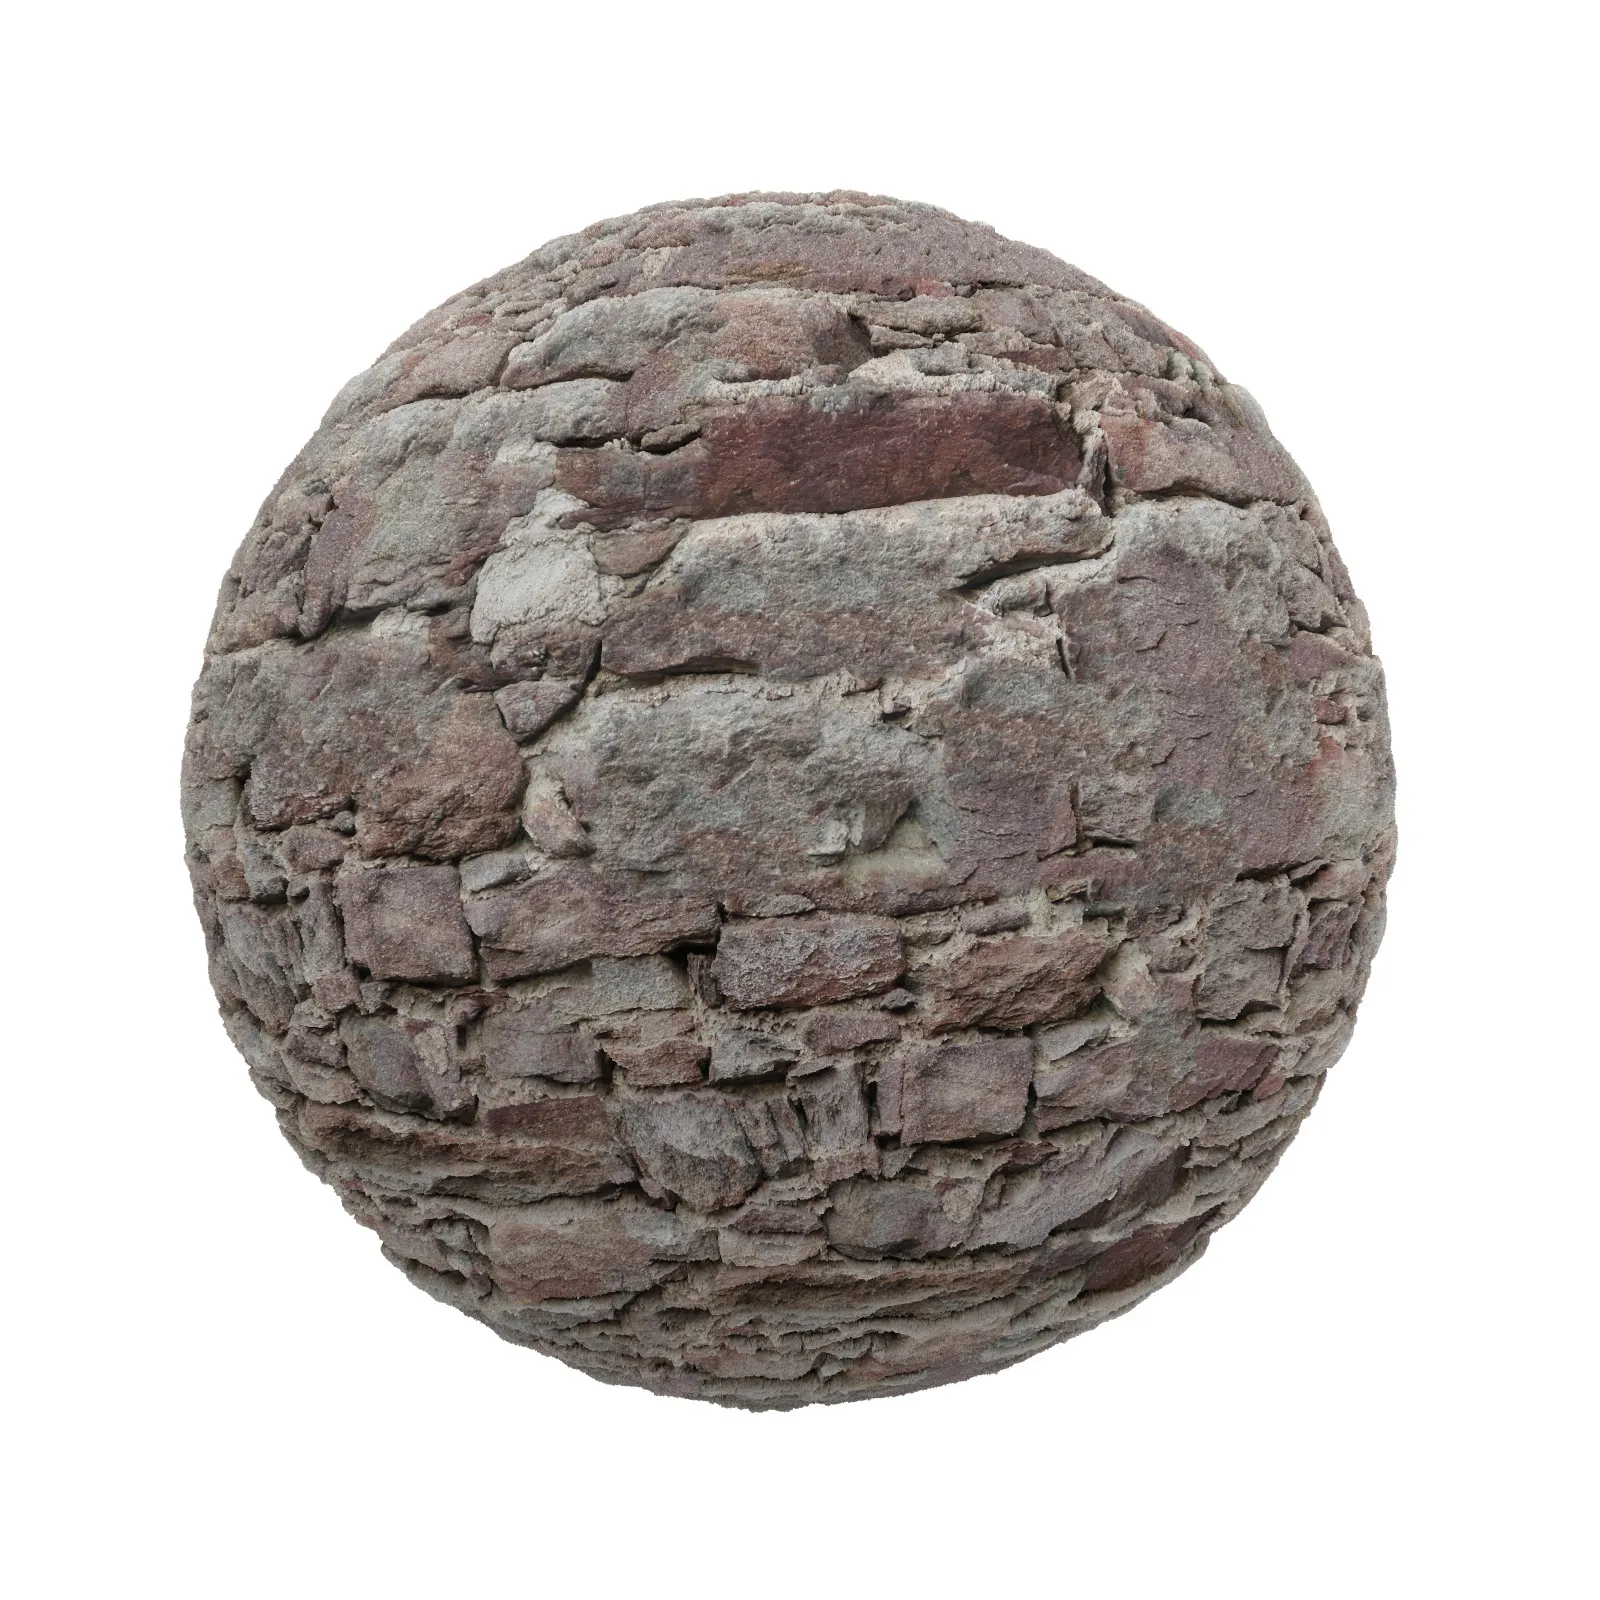 TEXTURES – STONES – CGAxis PBR Colection Vol 1 Stones – rough stone wall